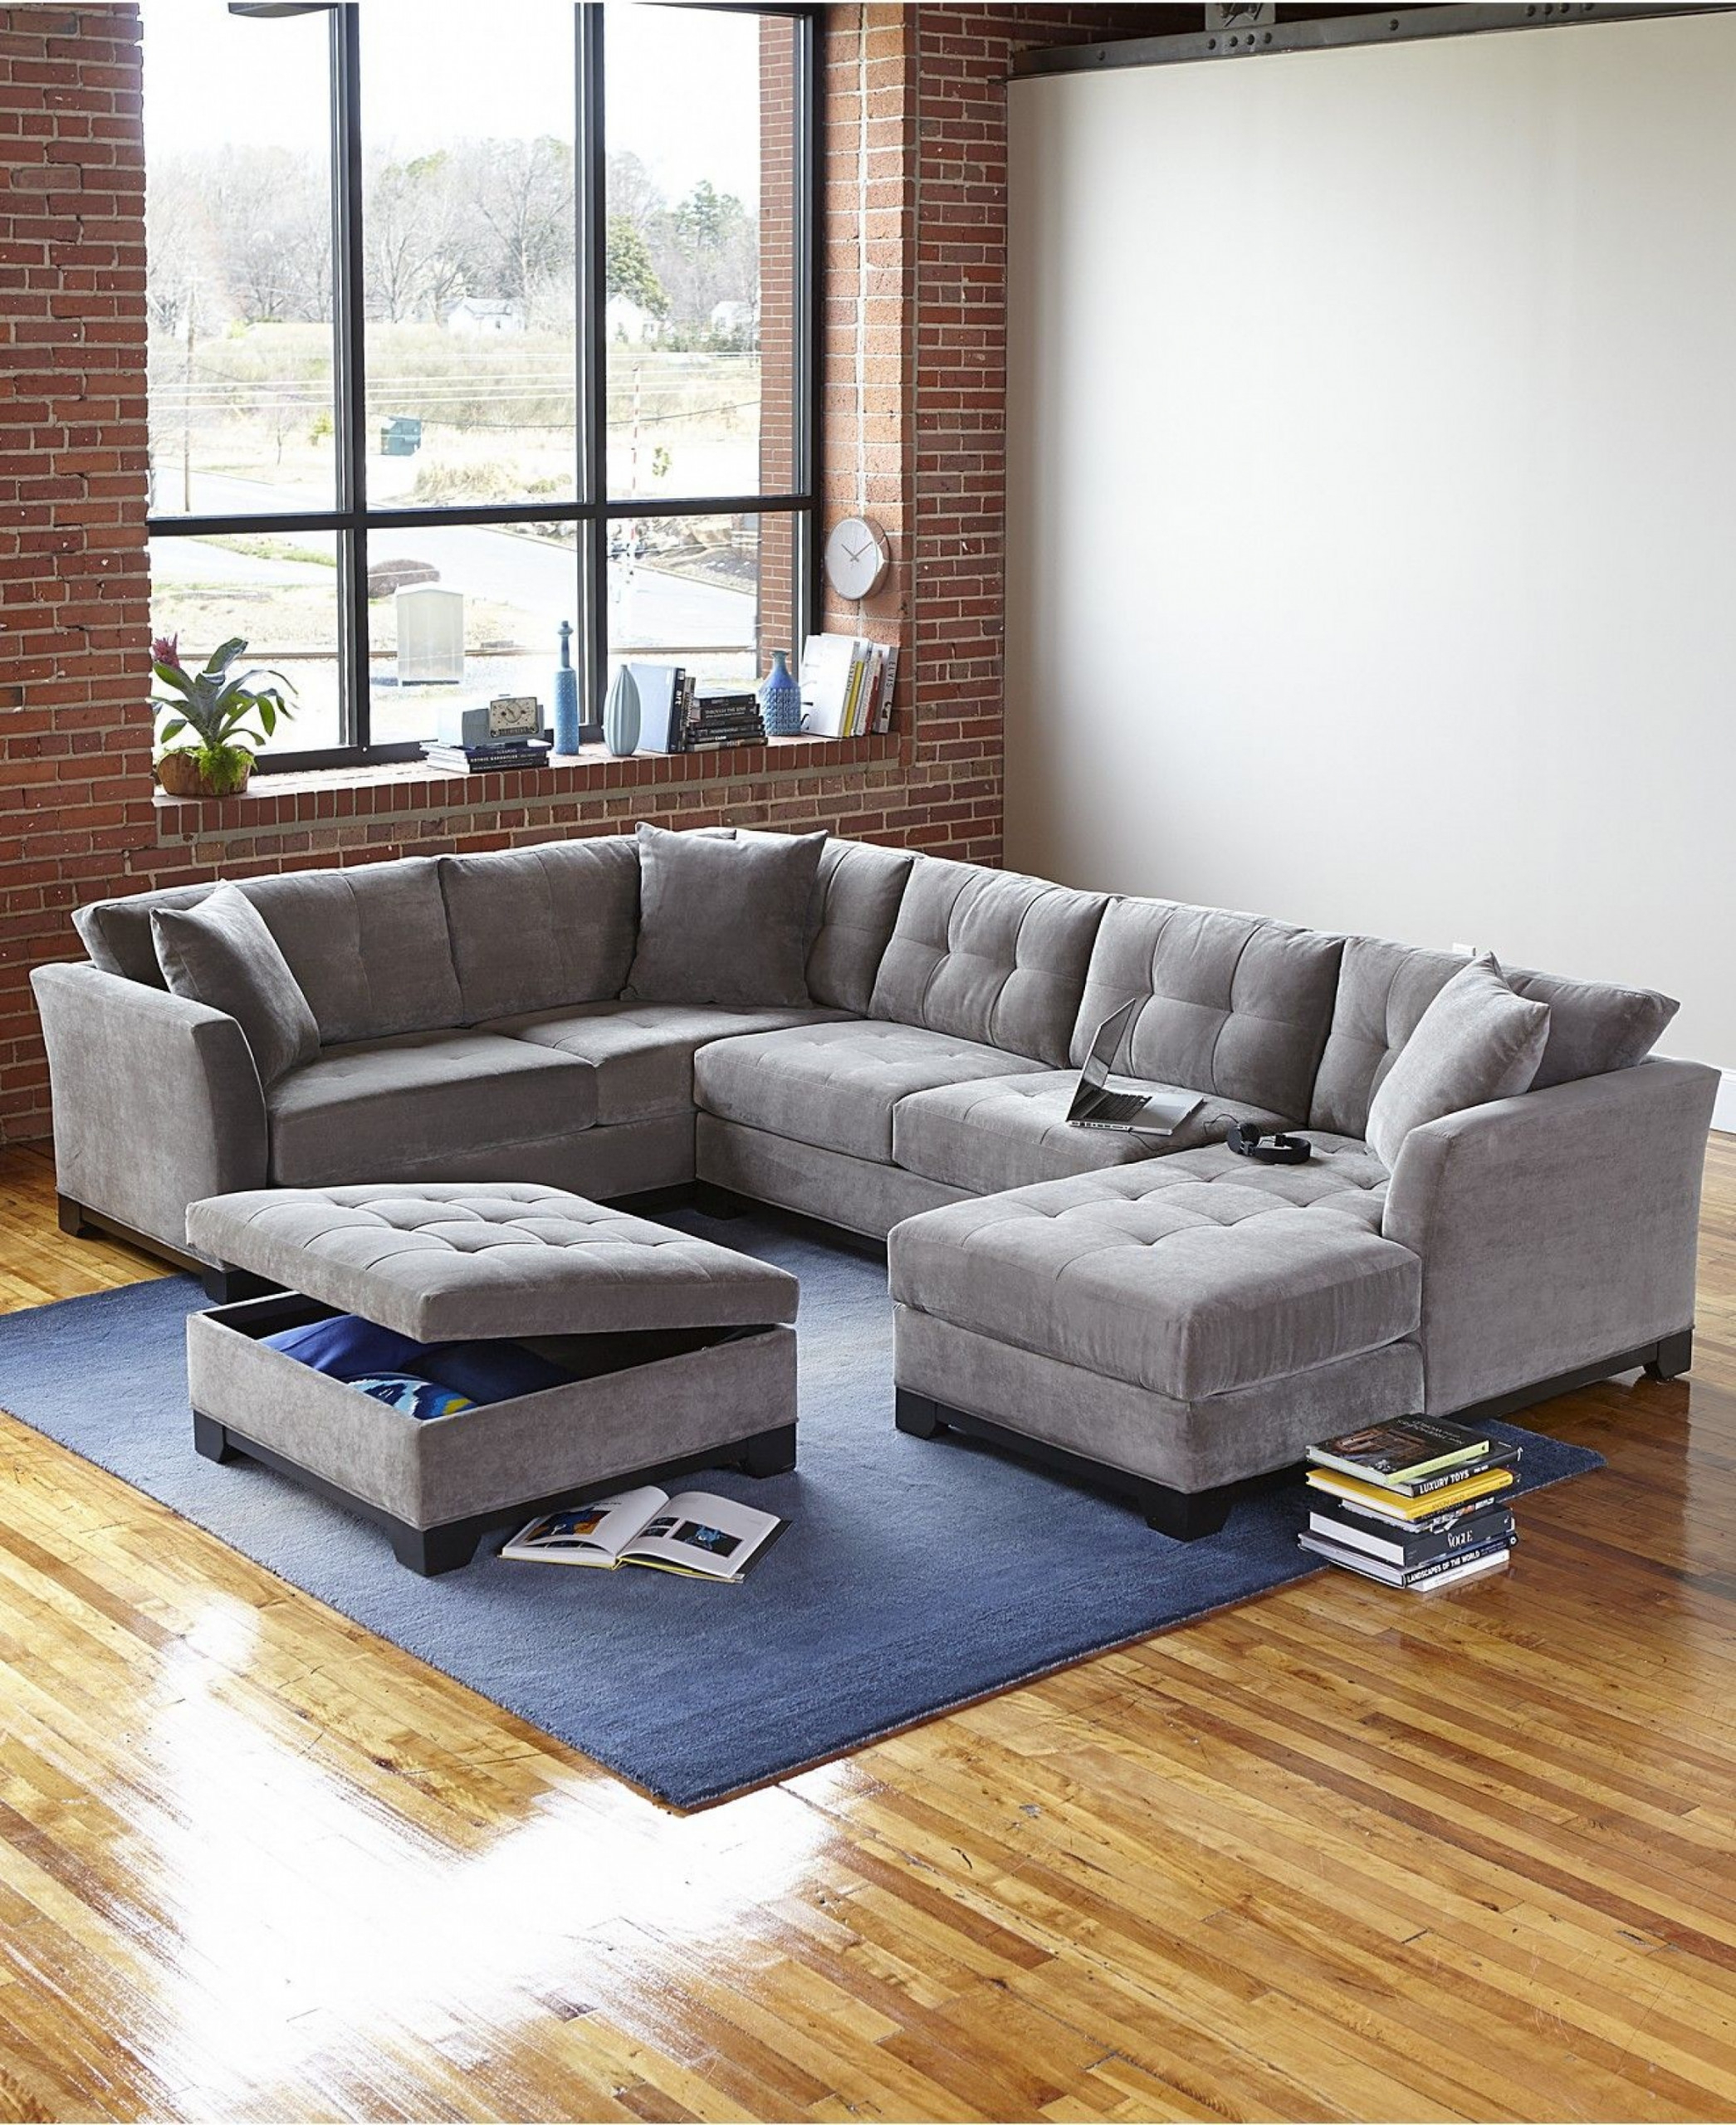 Microfiber sectional chaise